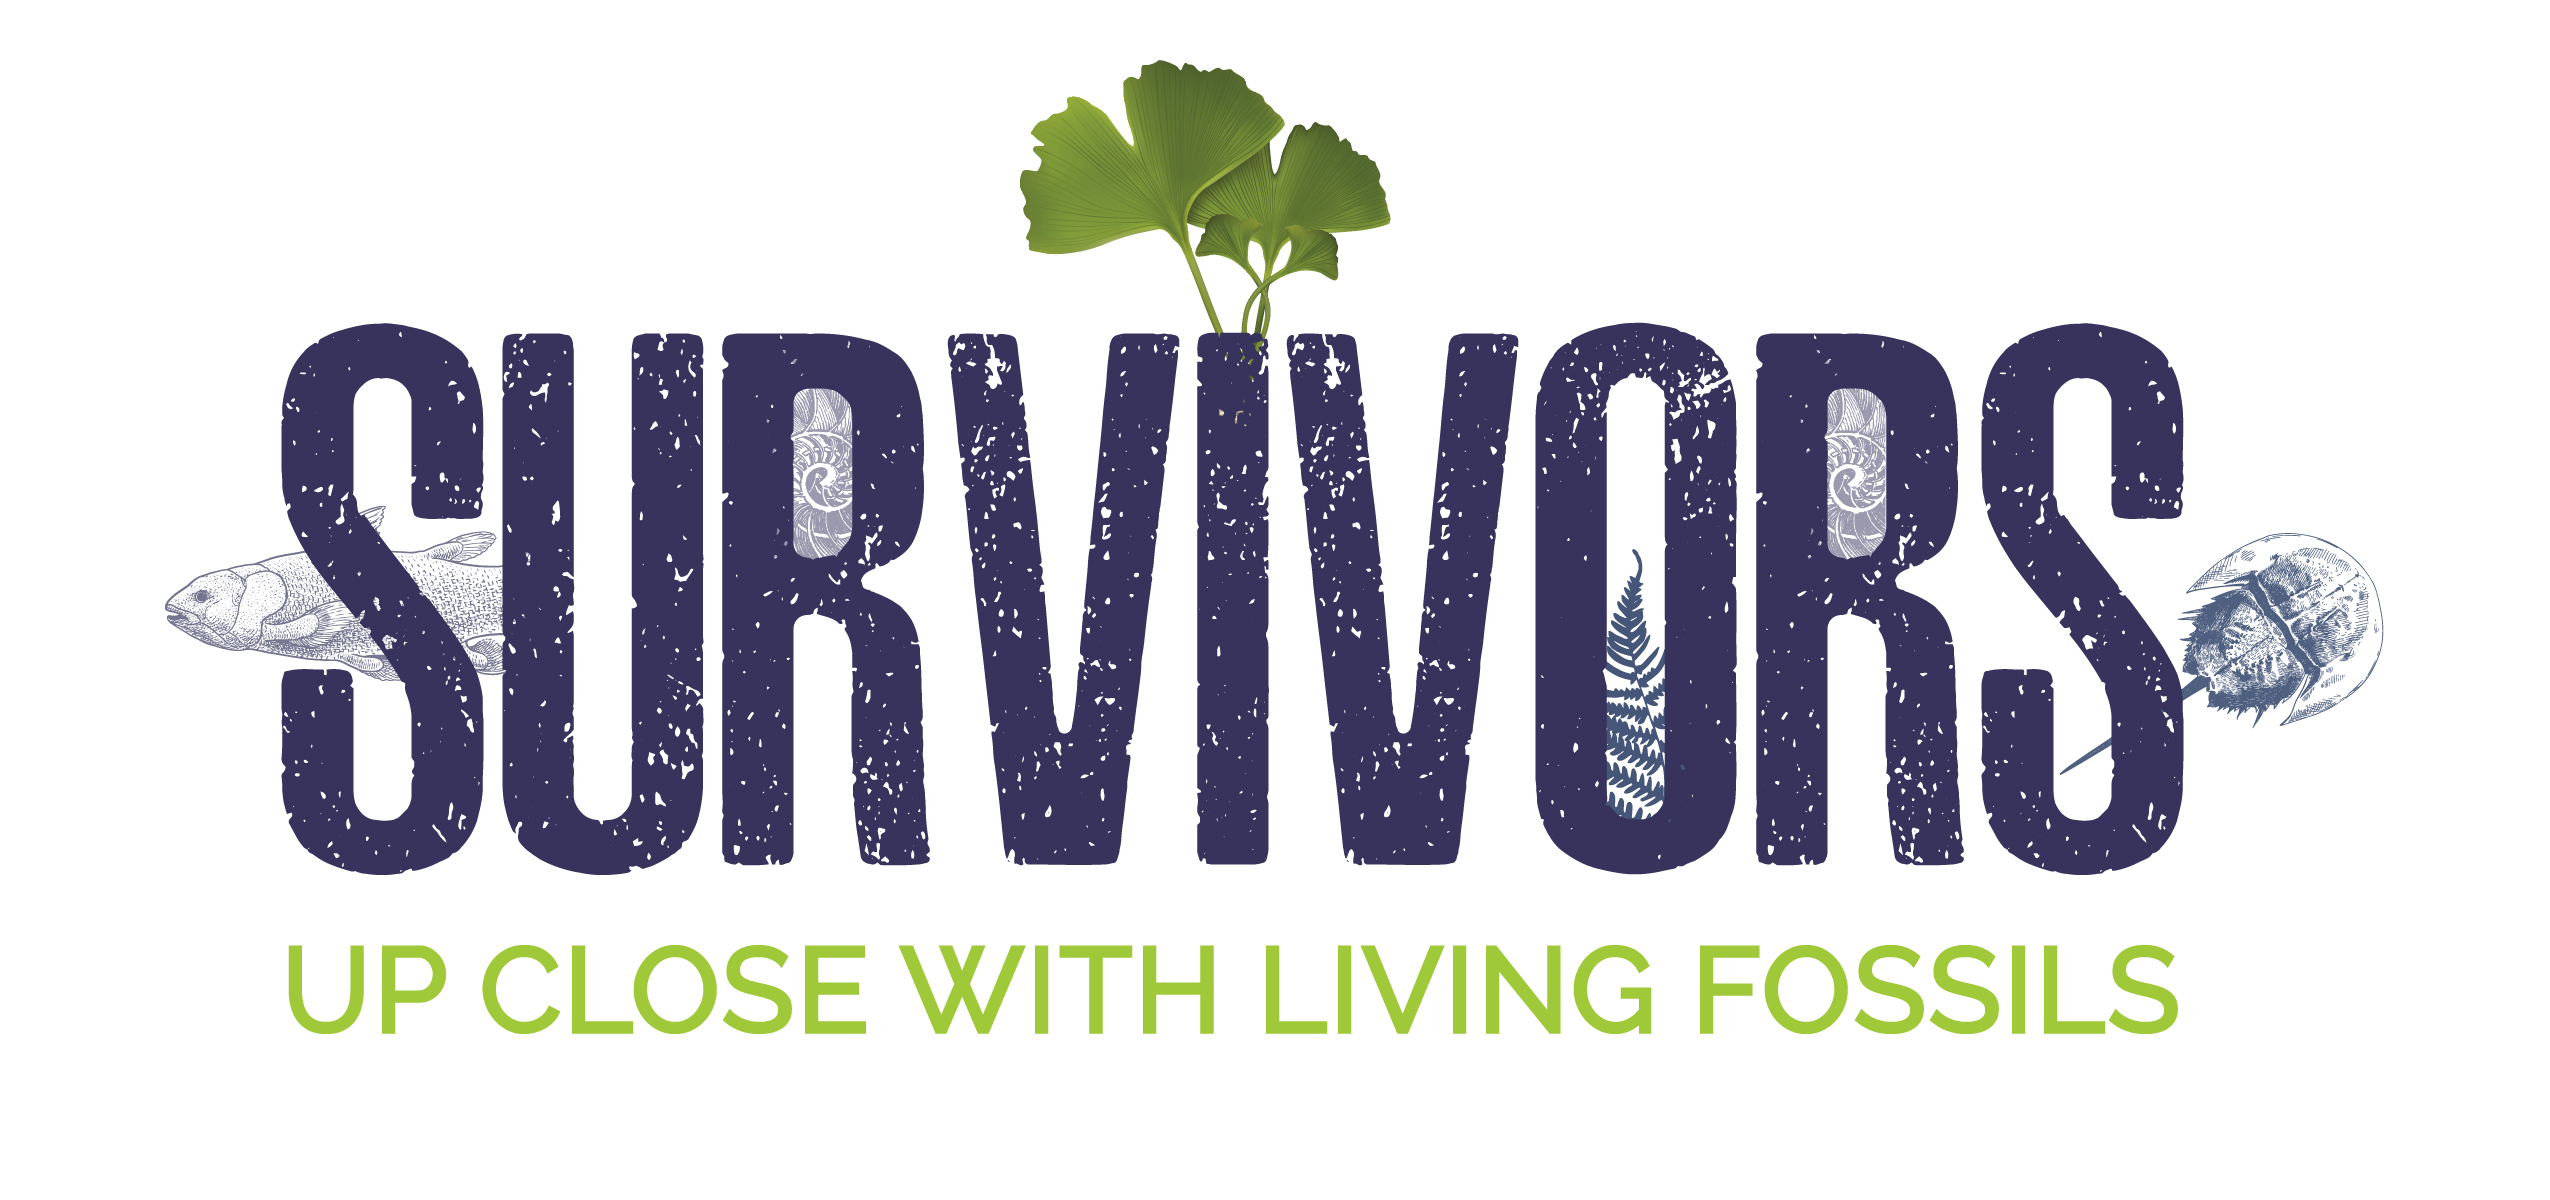 Logo that says "Survivors: Up Close with Living Fossils"